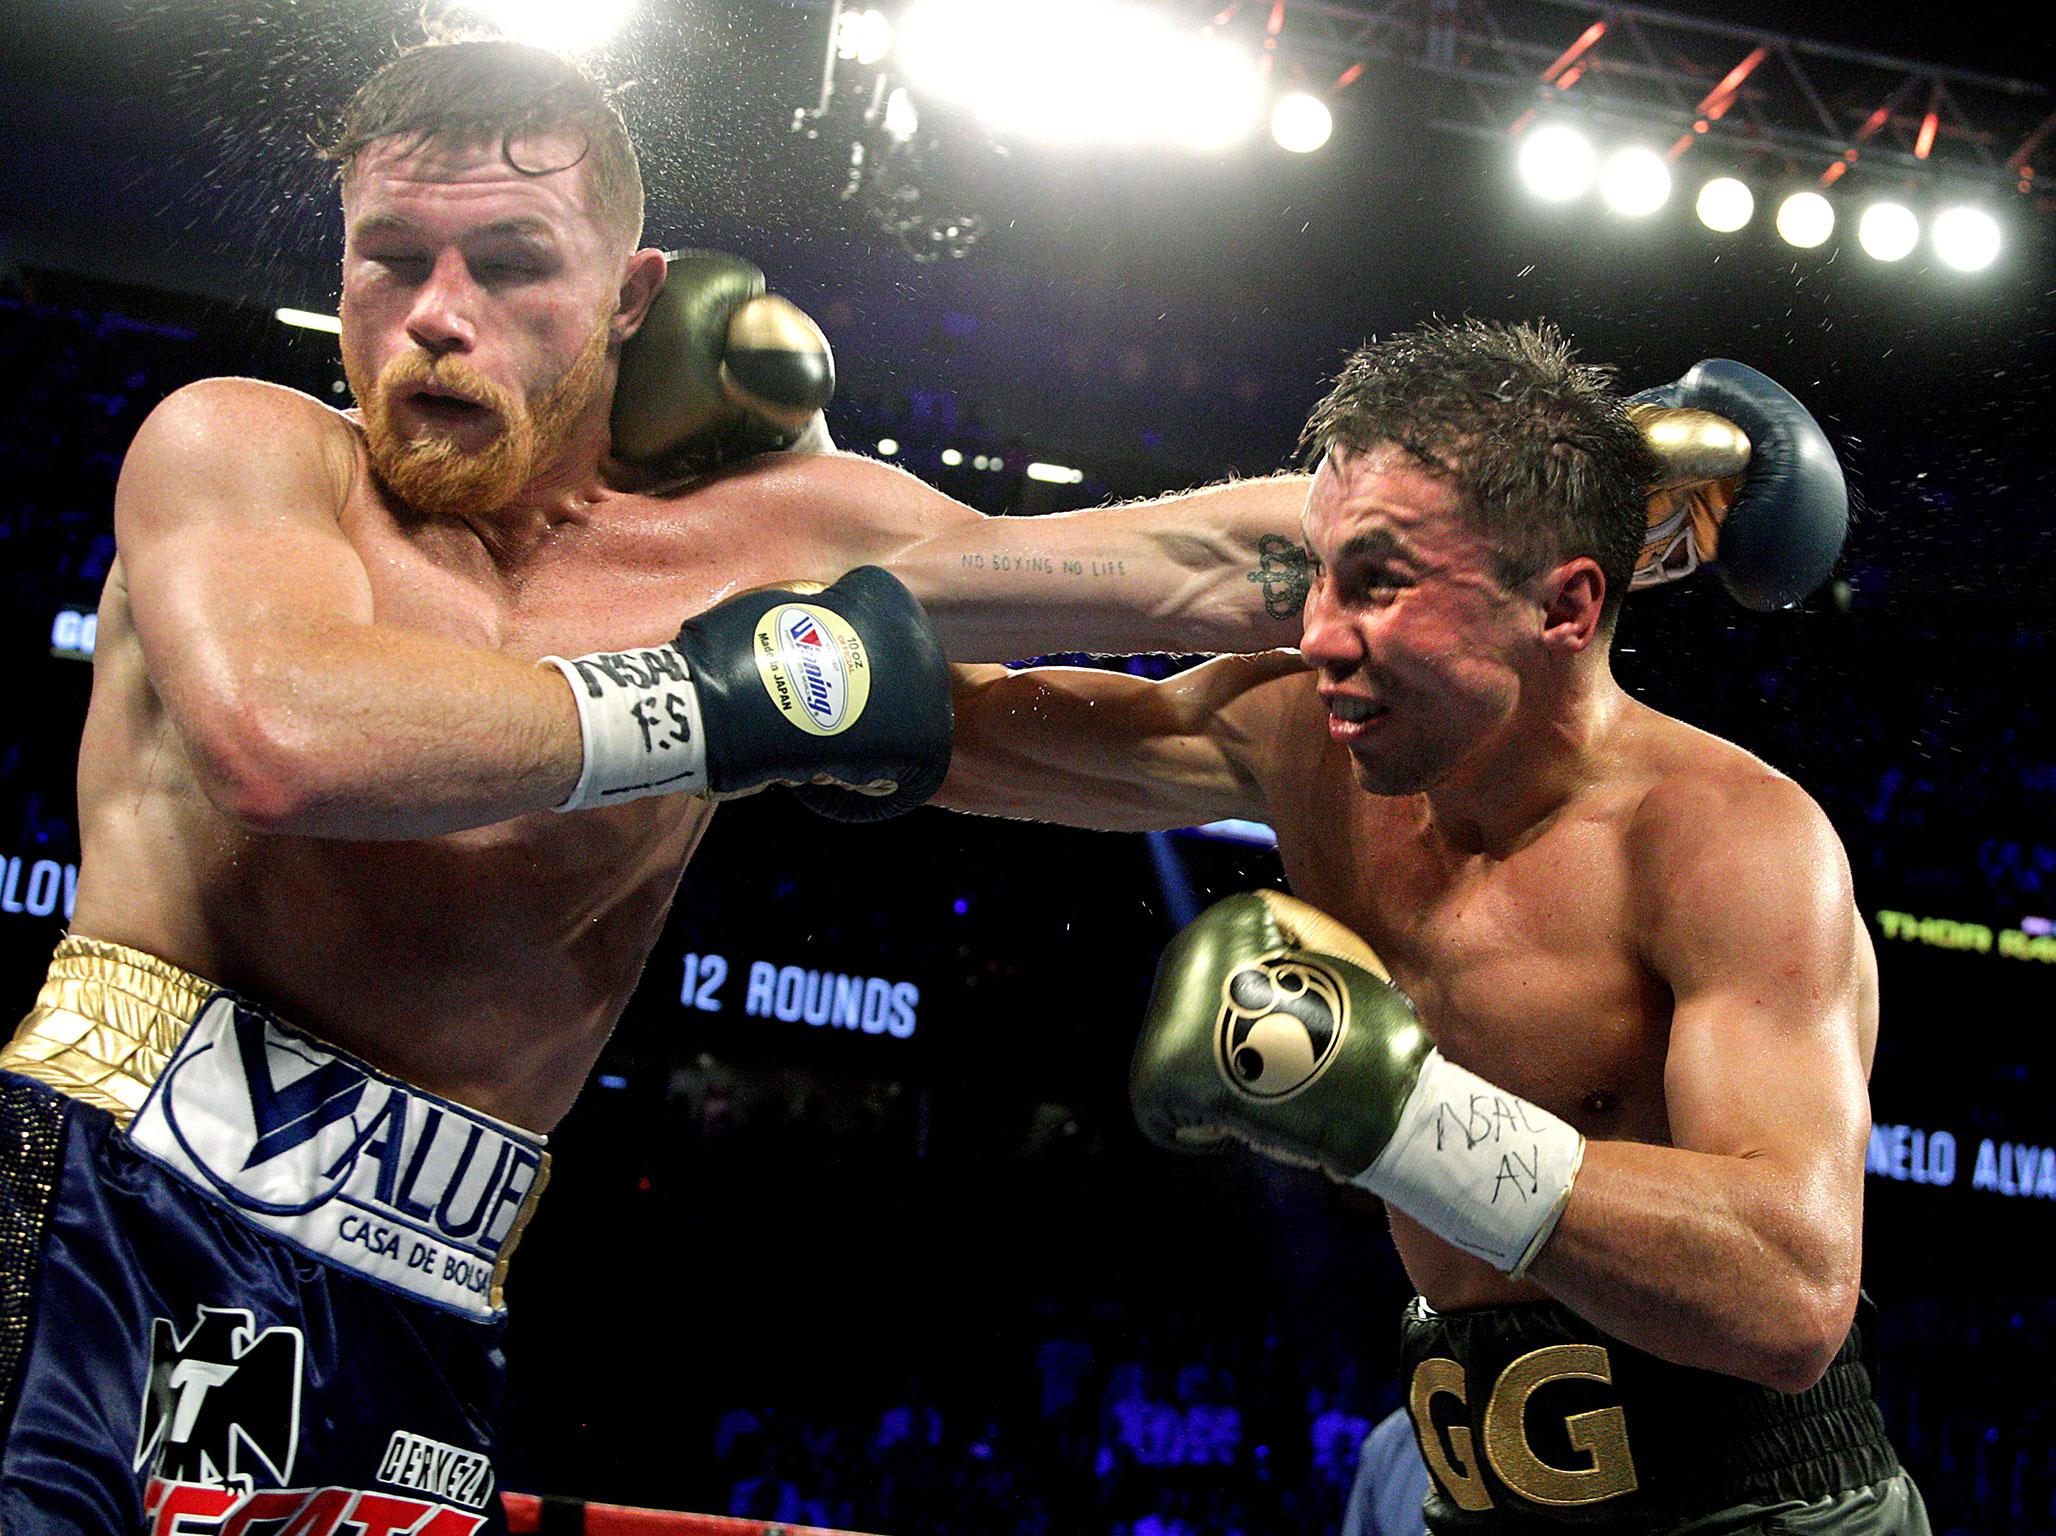 Golovkin should've been given the decision